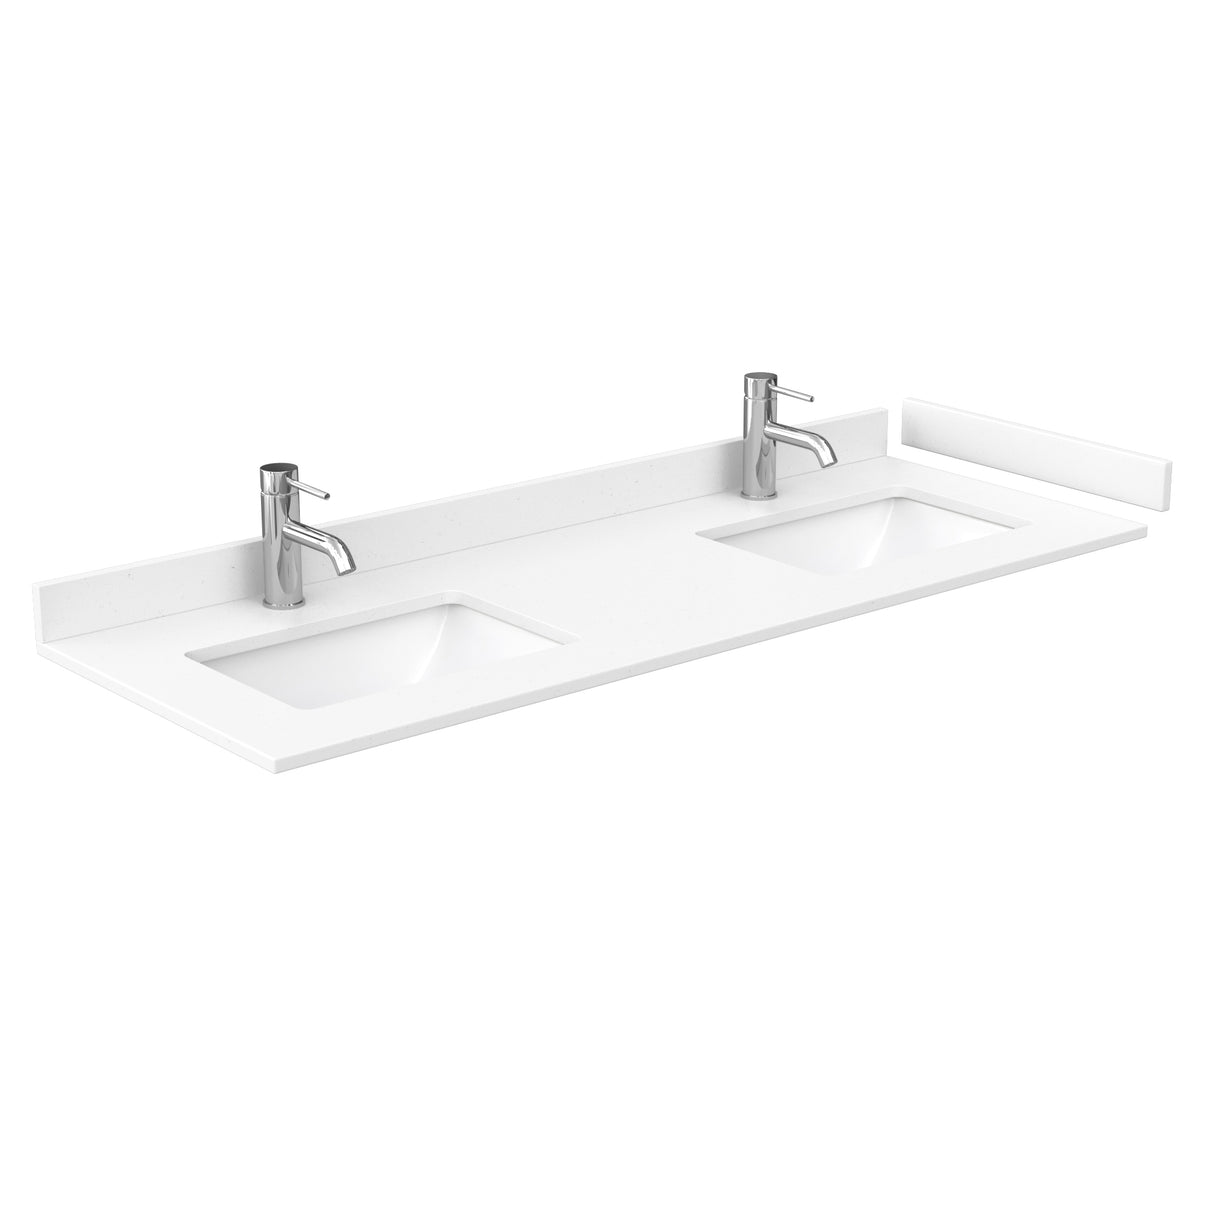 Beckett 60 Inch Double Bathroom Vanity in Green White Cultured Marble Countertop Undermount Square Sinks Brushed Nickel Trim